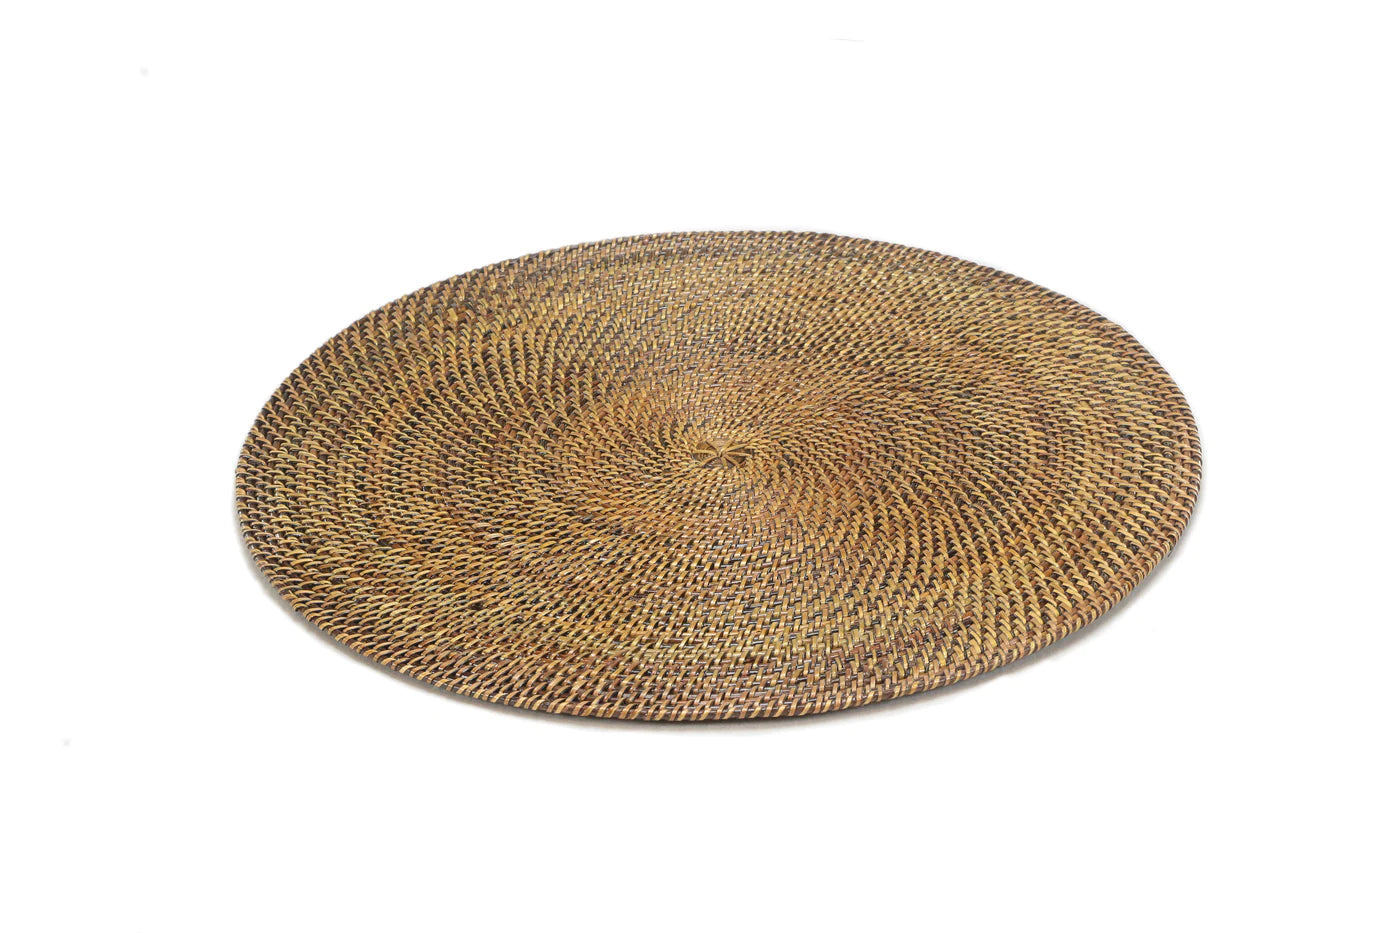 15" Round Placemat - Set of 4